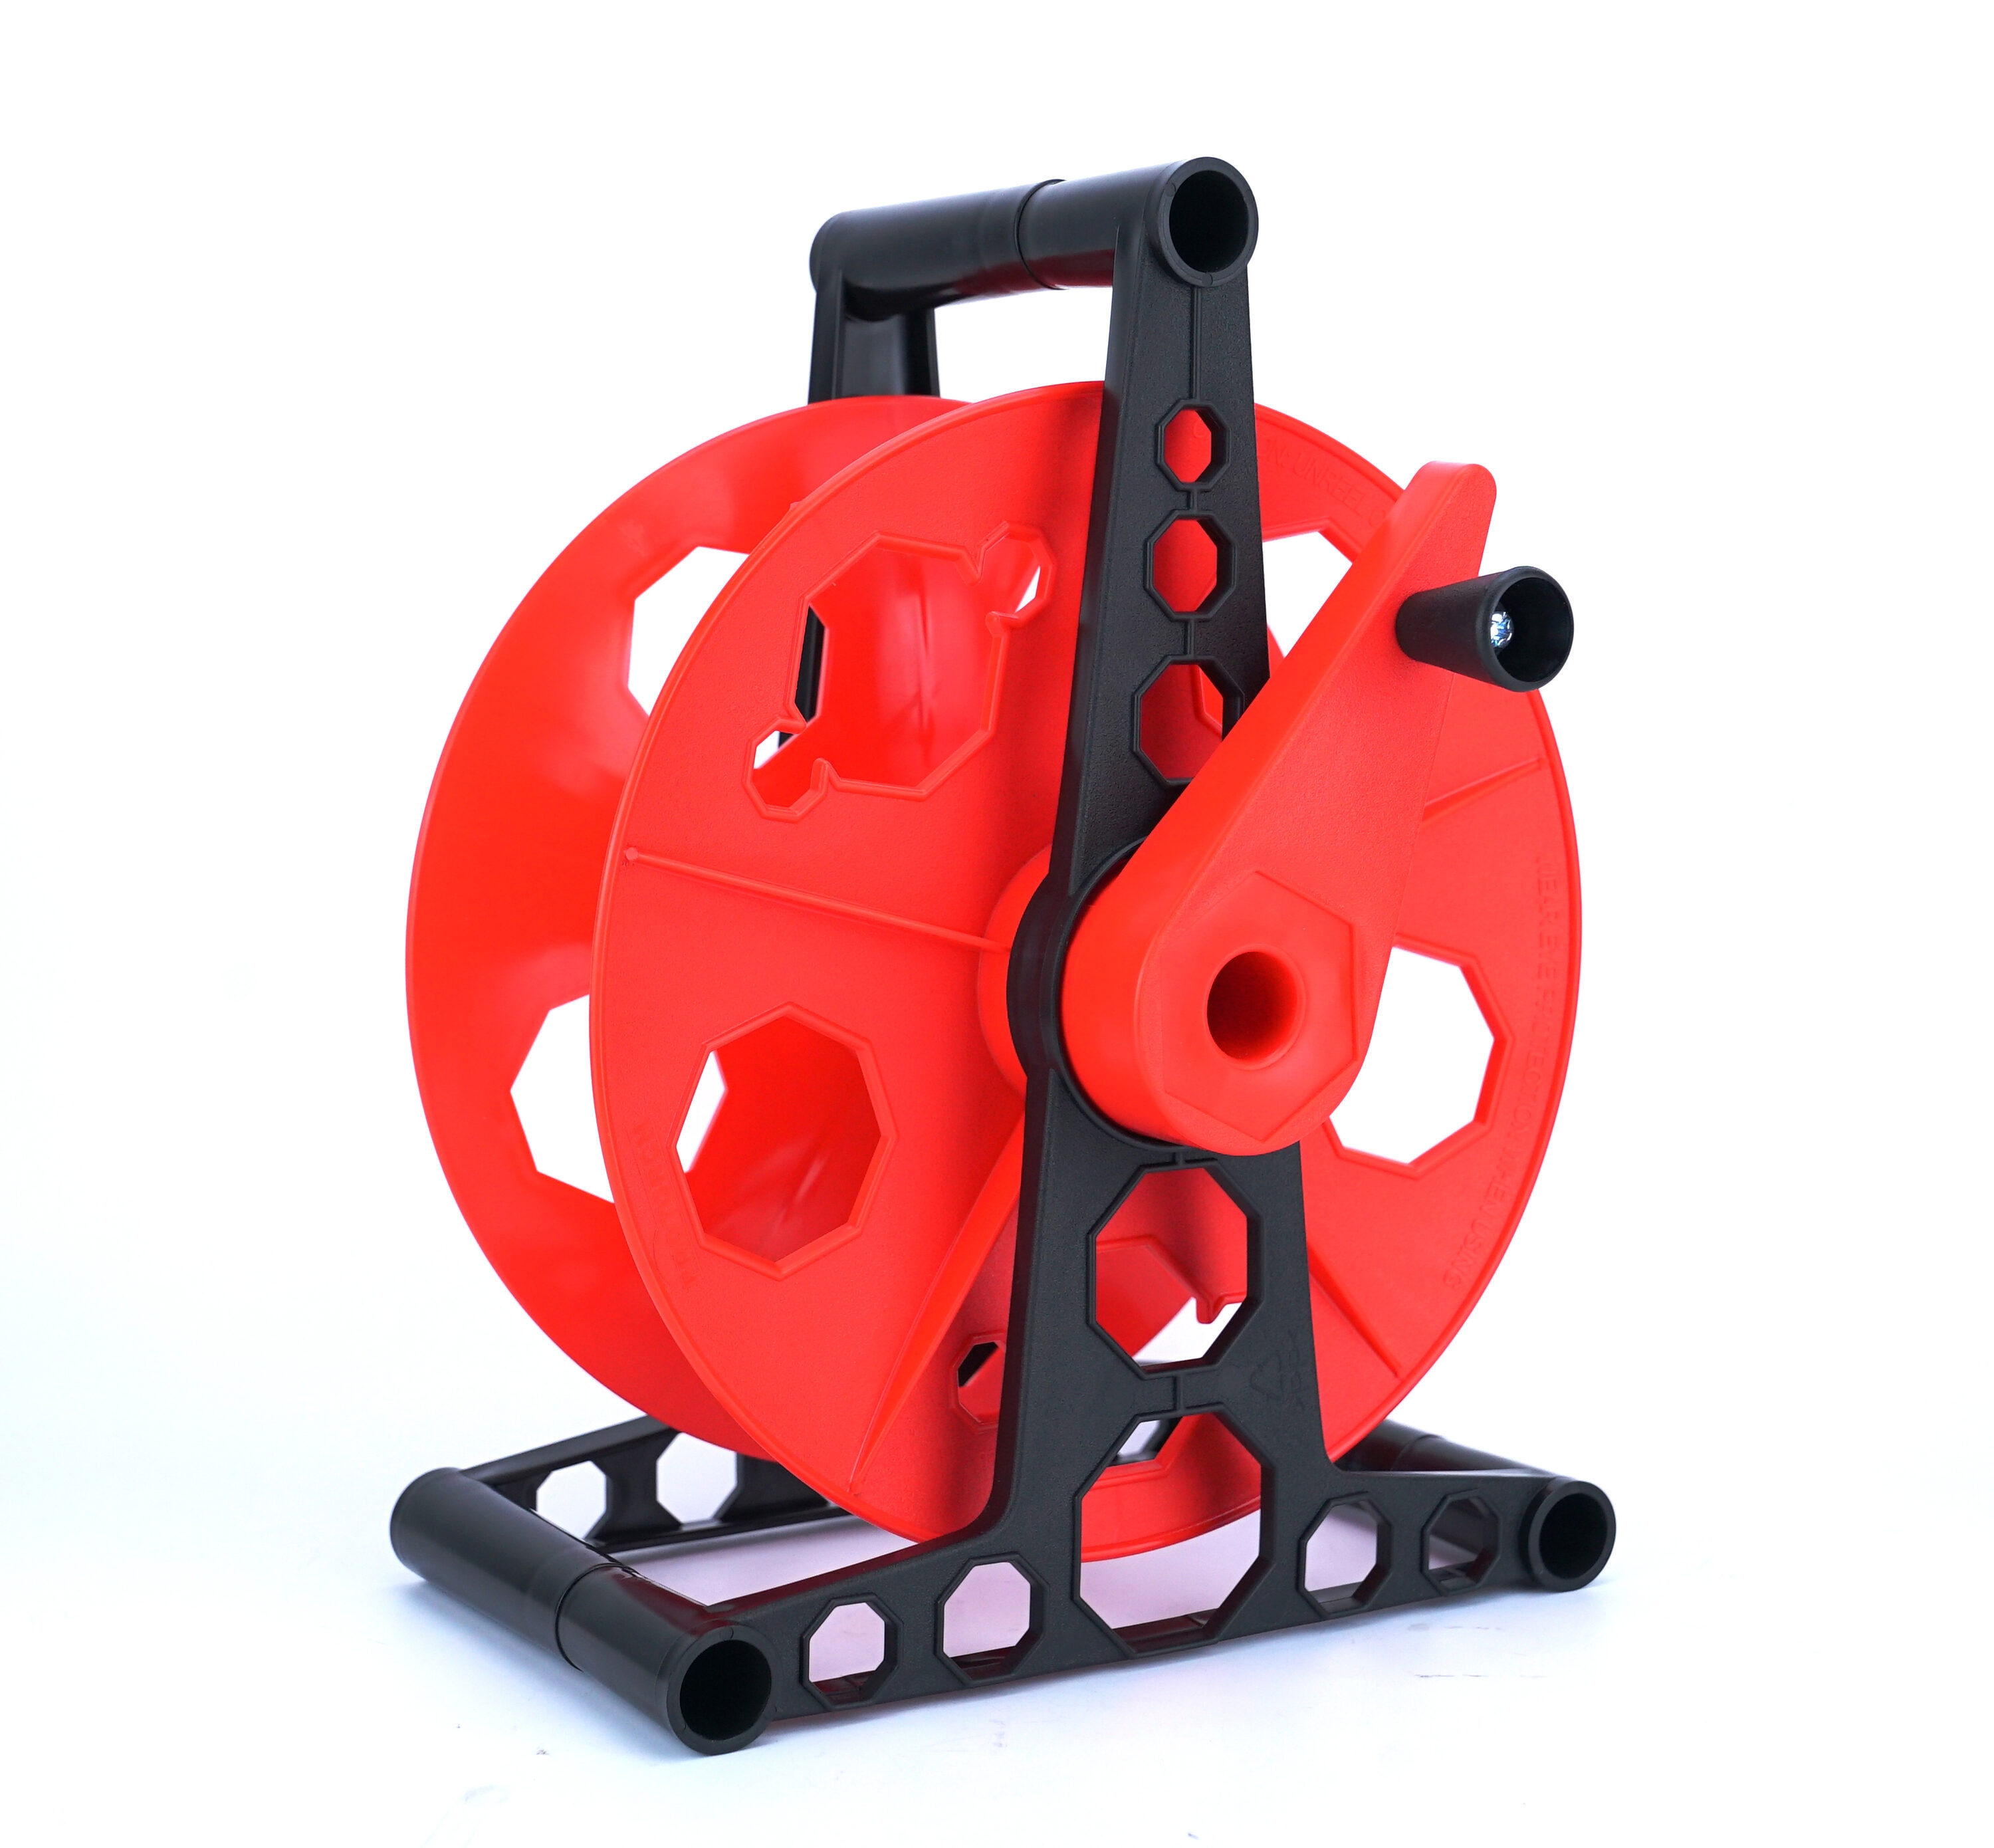 Utilitech Cord Storage Reel and Stand at